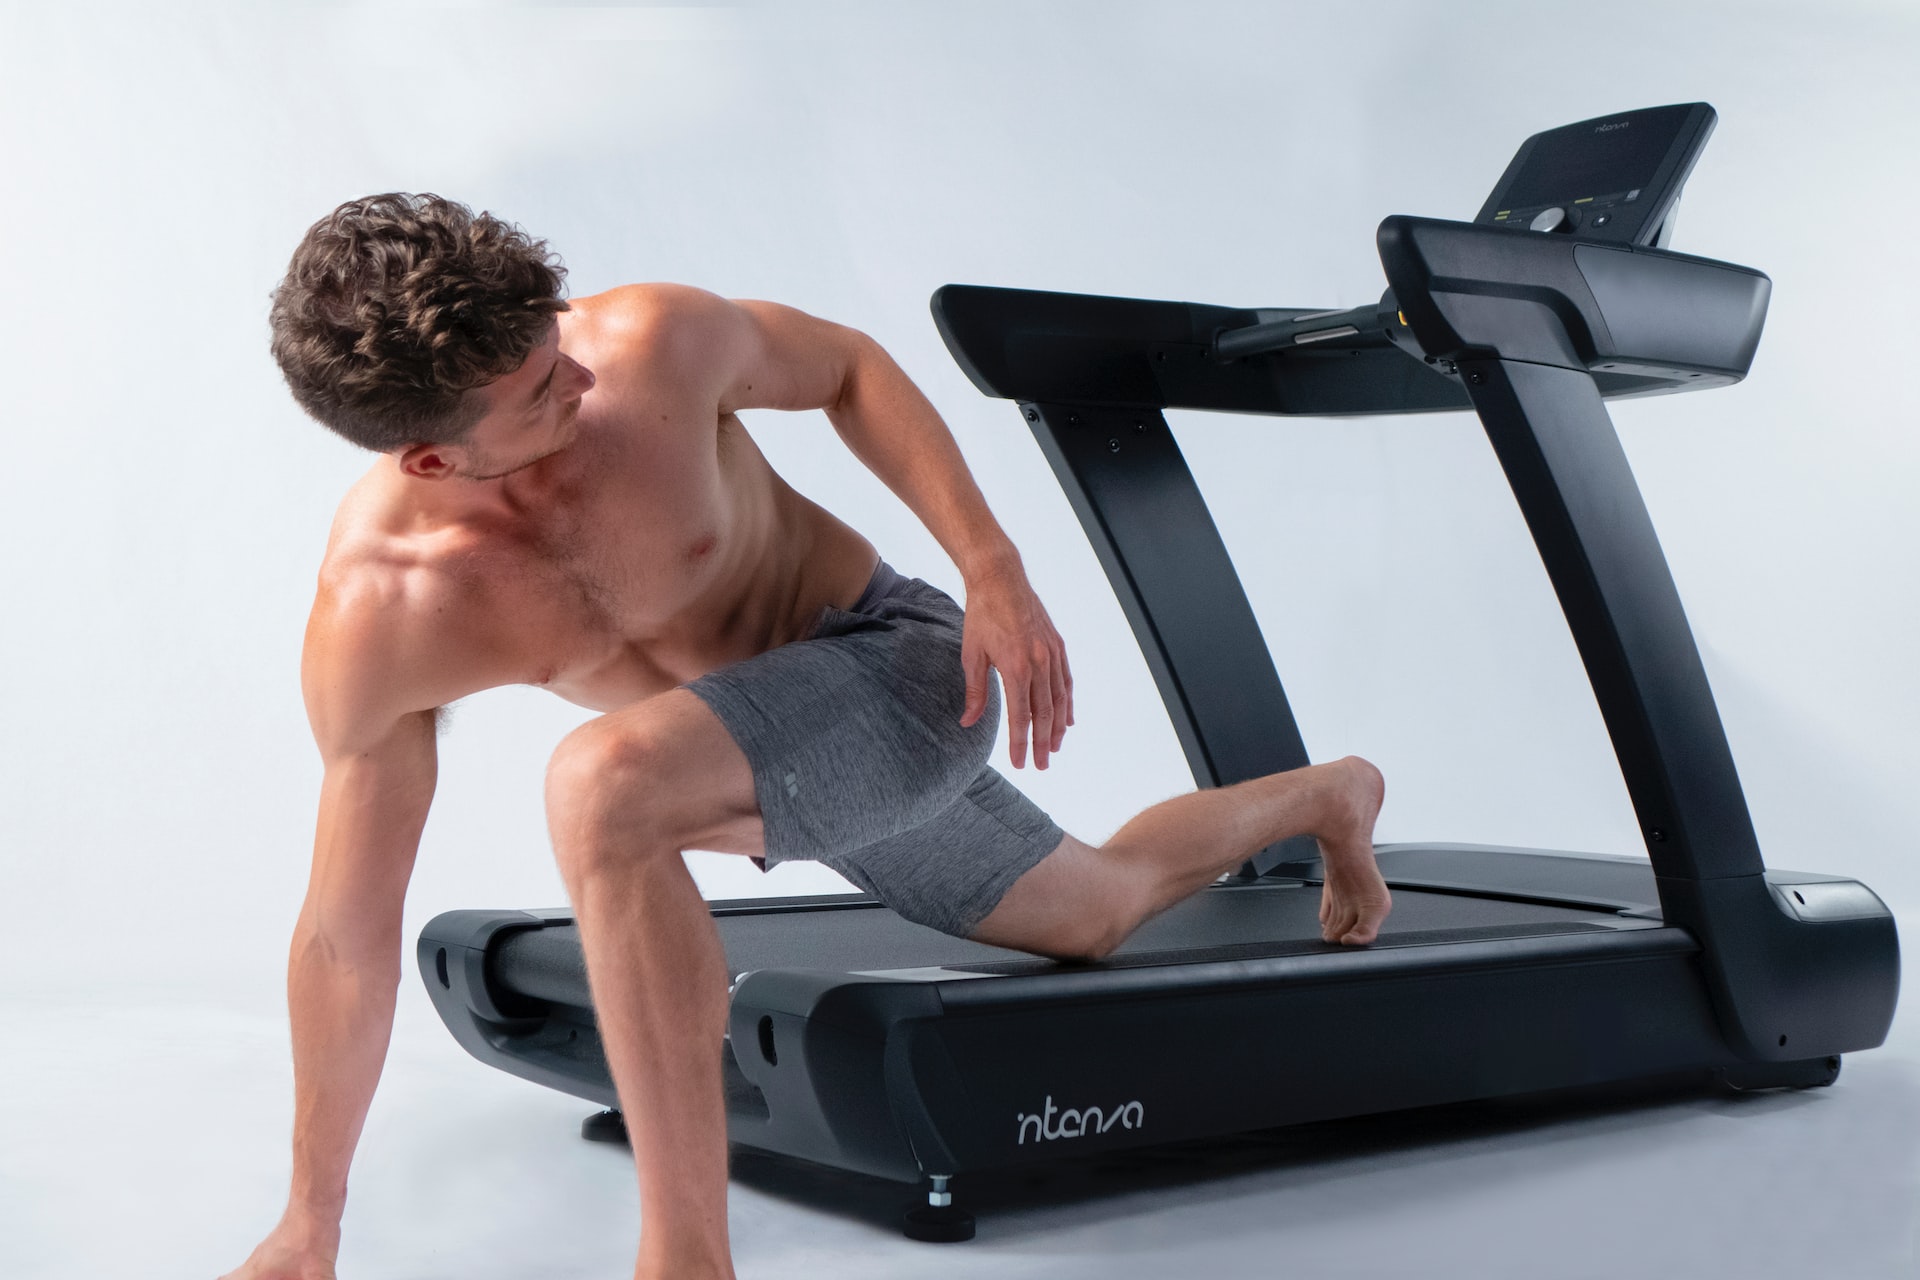 HOW MUCH WEIGHT IS SAFE TO LOSE ON A TREADMILL IN A WEEK